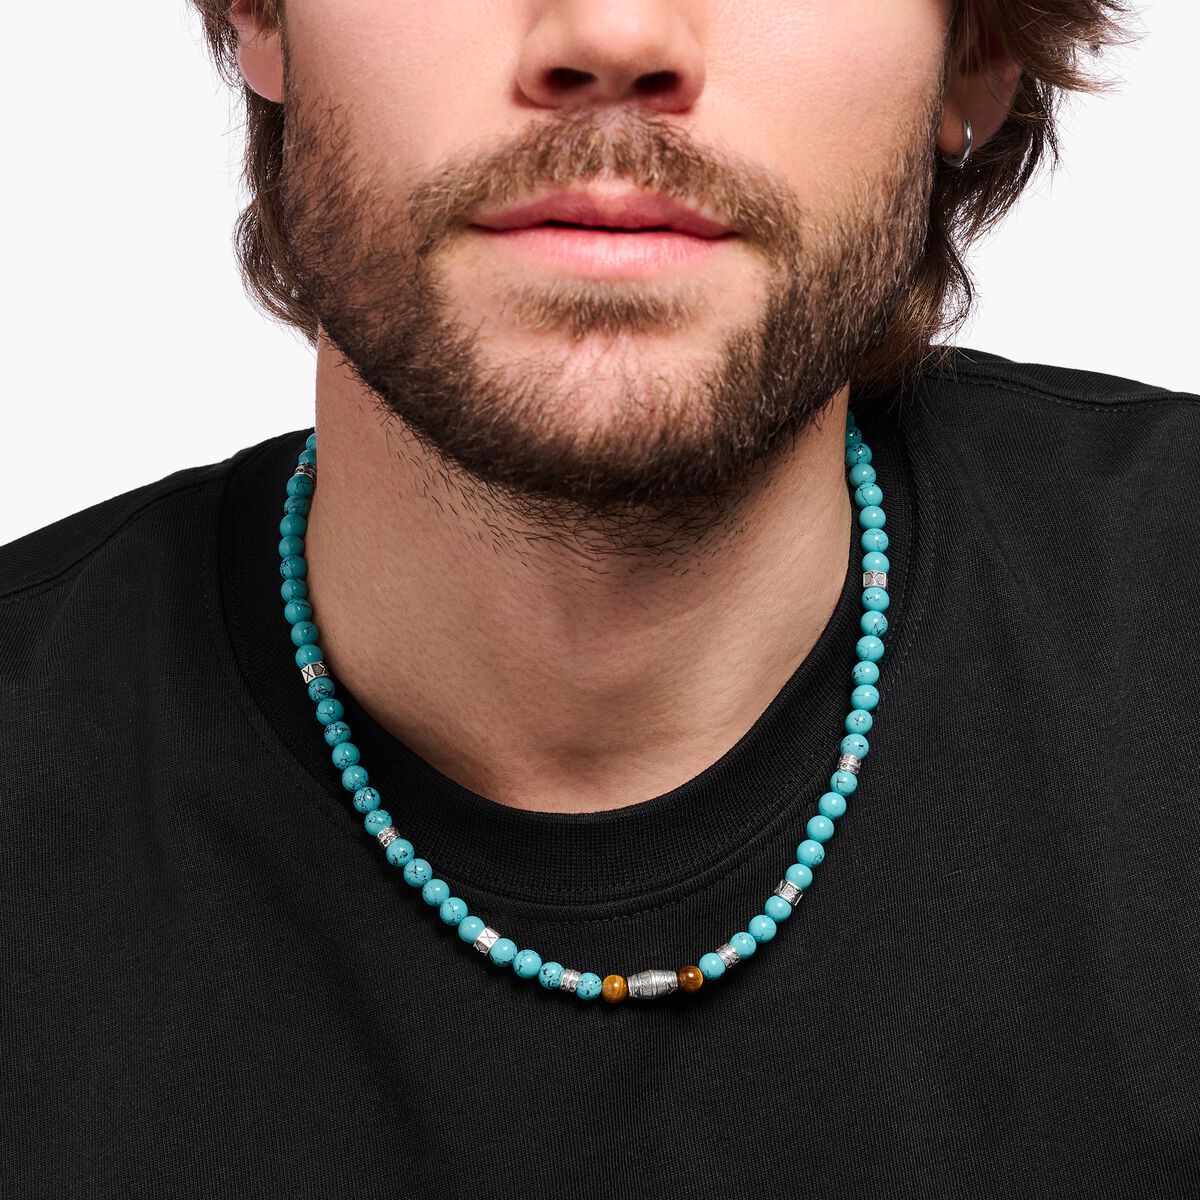 Necklace for men: with various beads